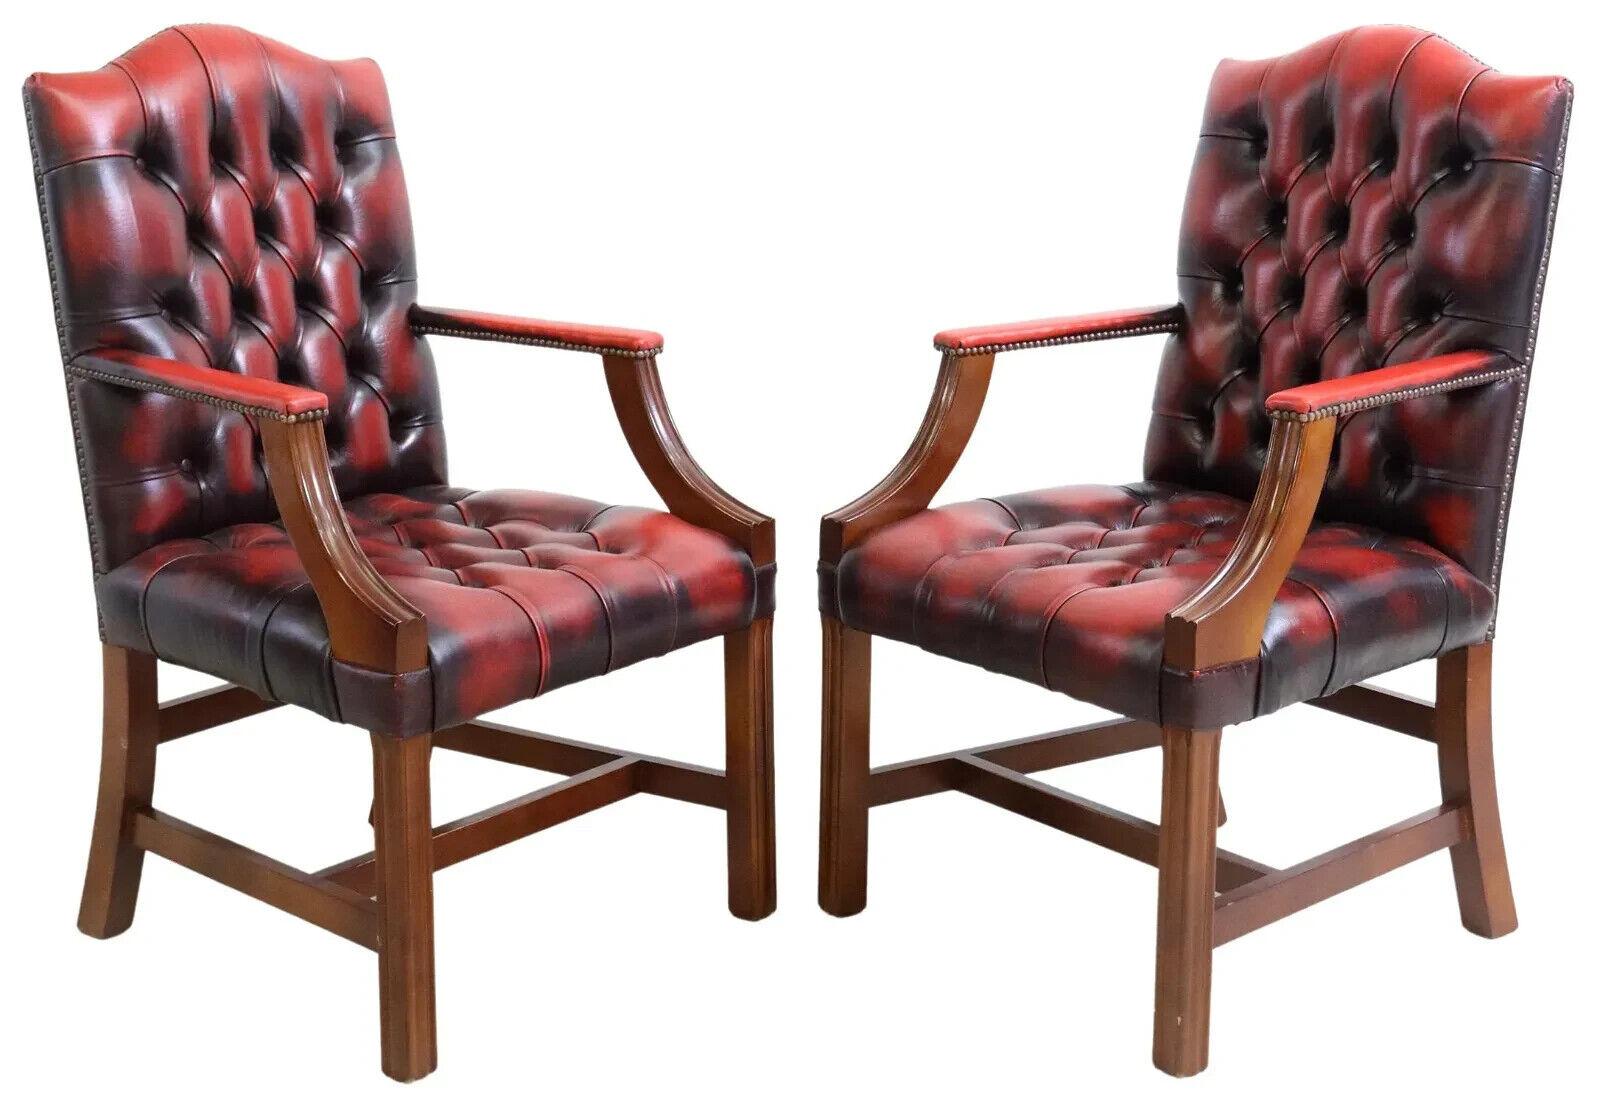 20th C. Red Leather, English, Six, GainsBorough Style, Nailhead Trim Armchairs! For Sale 3